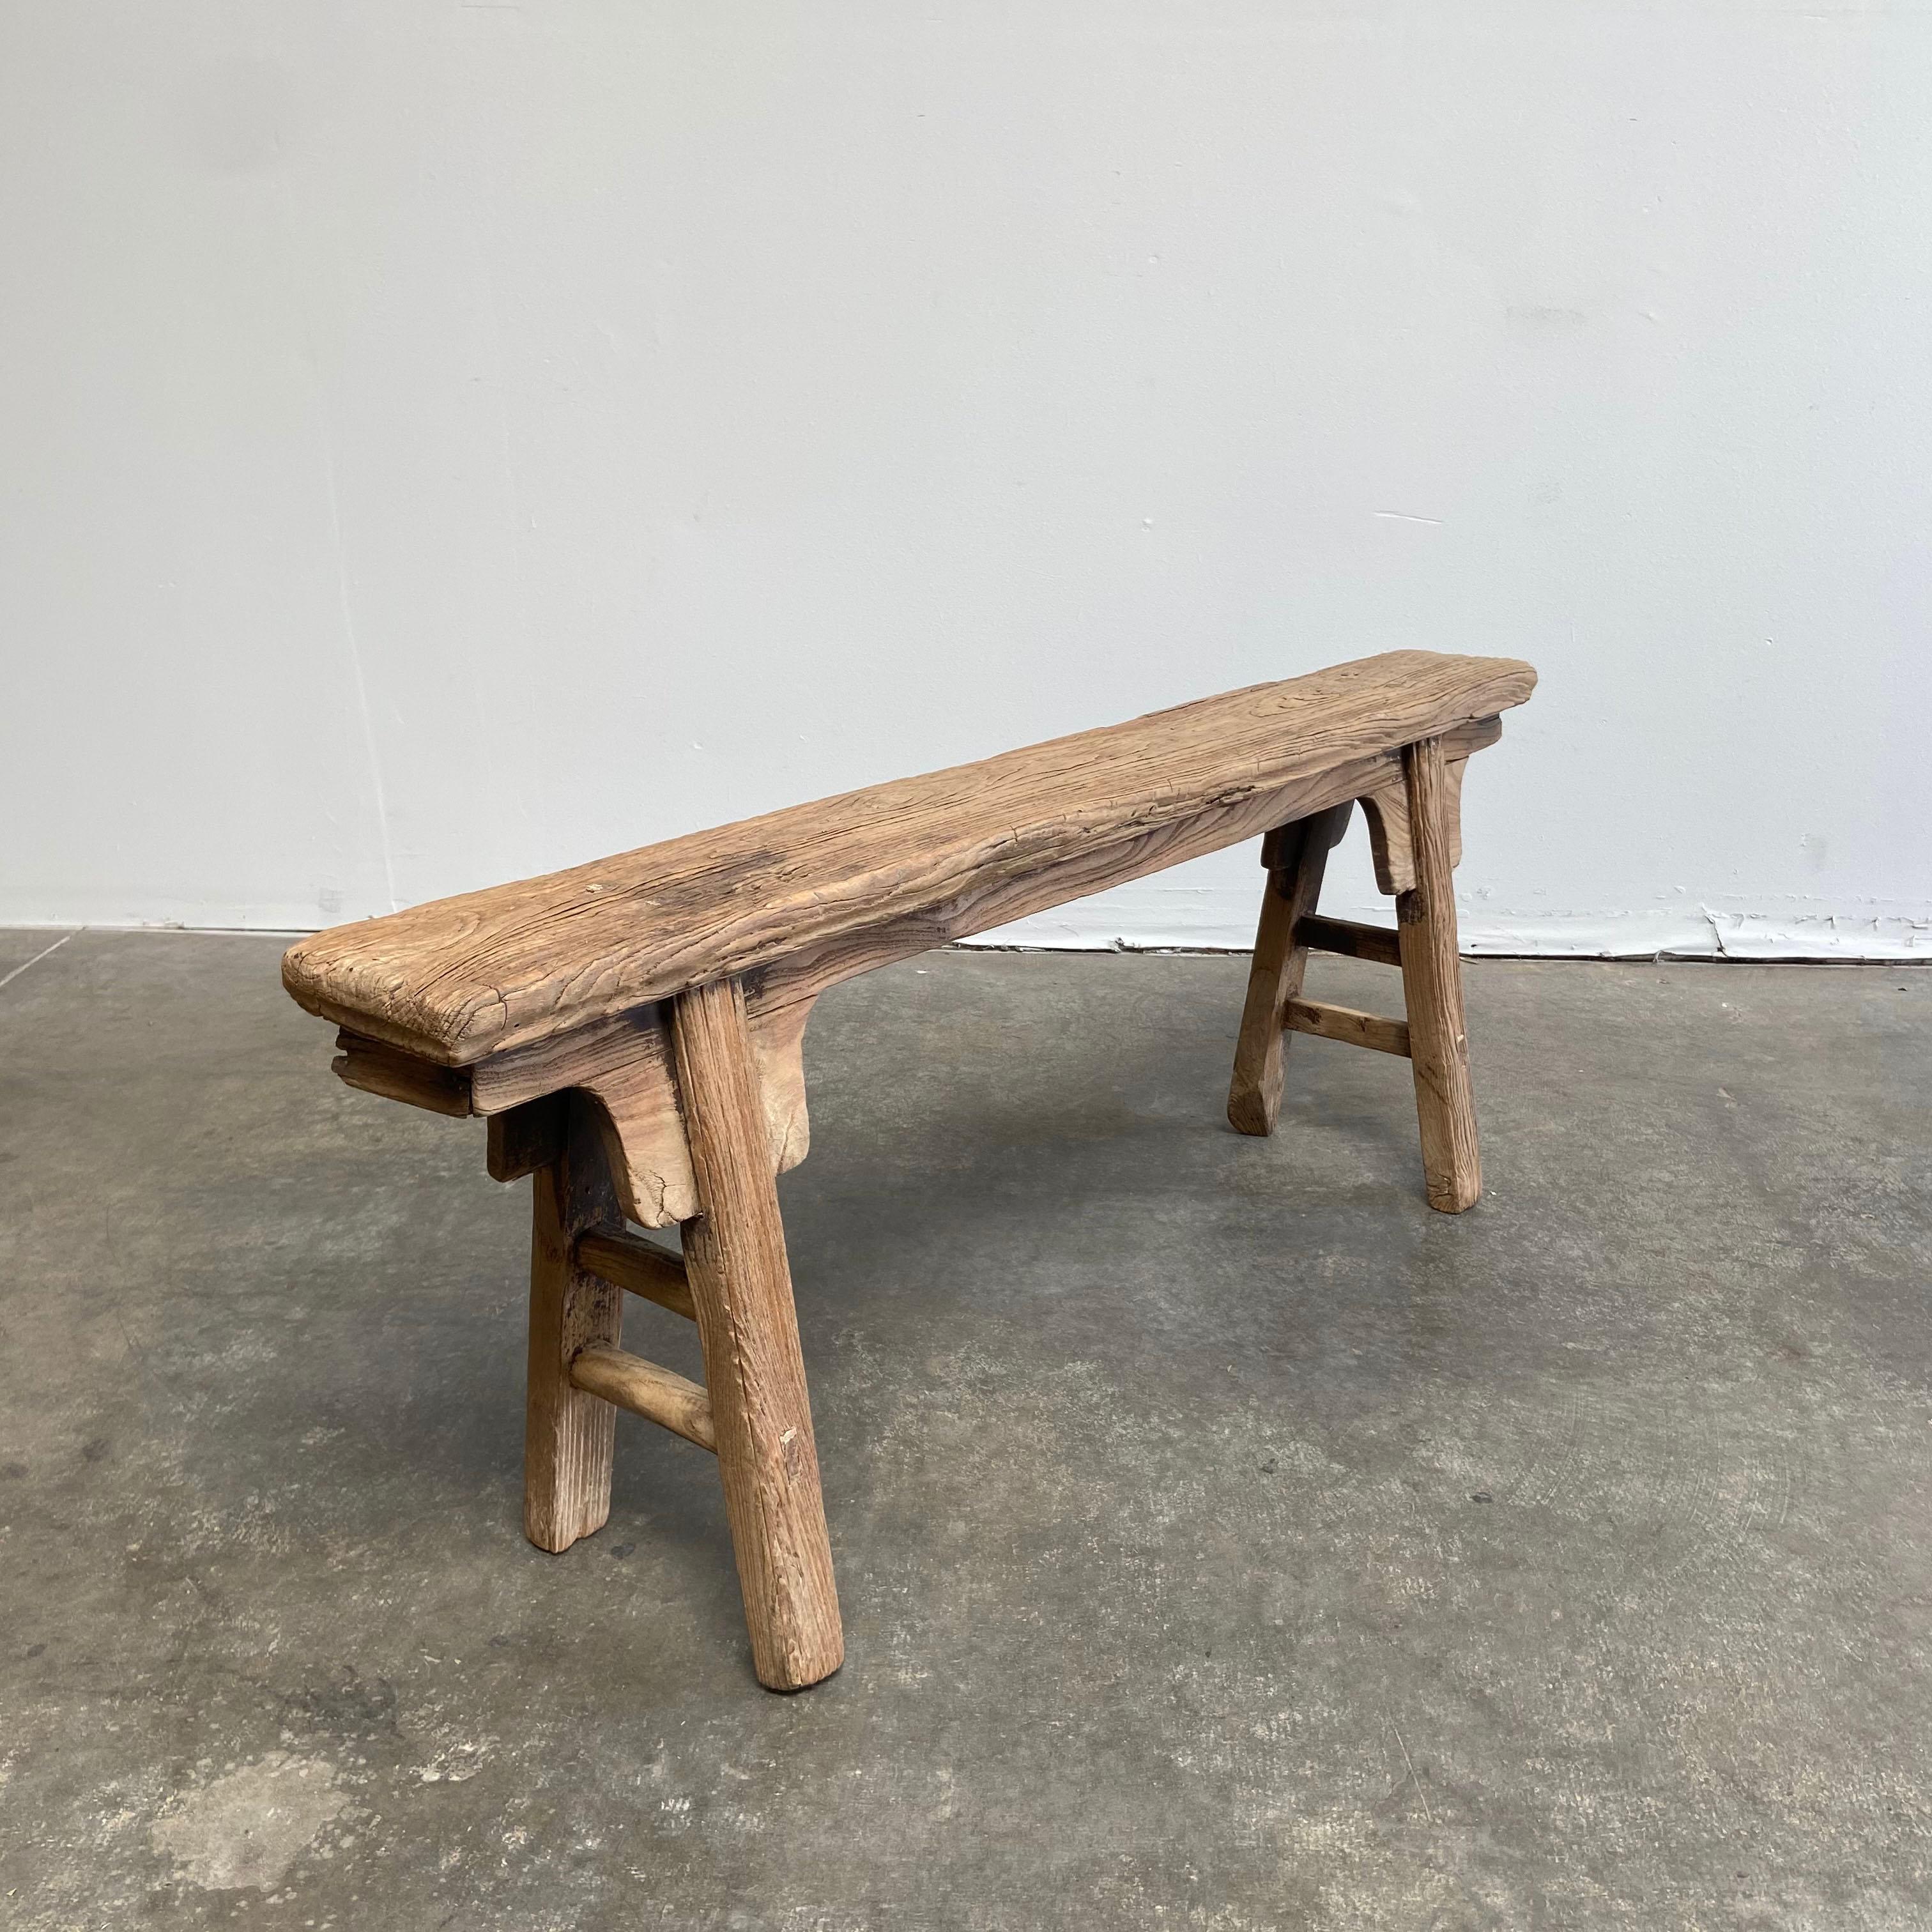 Skinny bench / vintage antique elm wood bench
These are the real vintage antique elm wood benches! Beautiful antique patina, with weathering and age, these are solid and sturdy ready for daily use, use as a table behind a sofa, stool, coffee table,